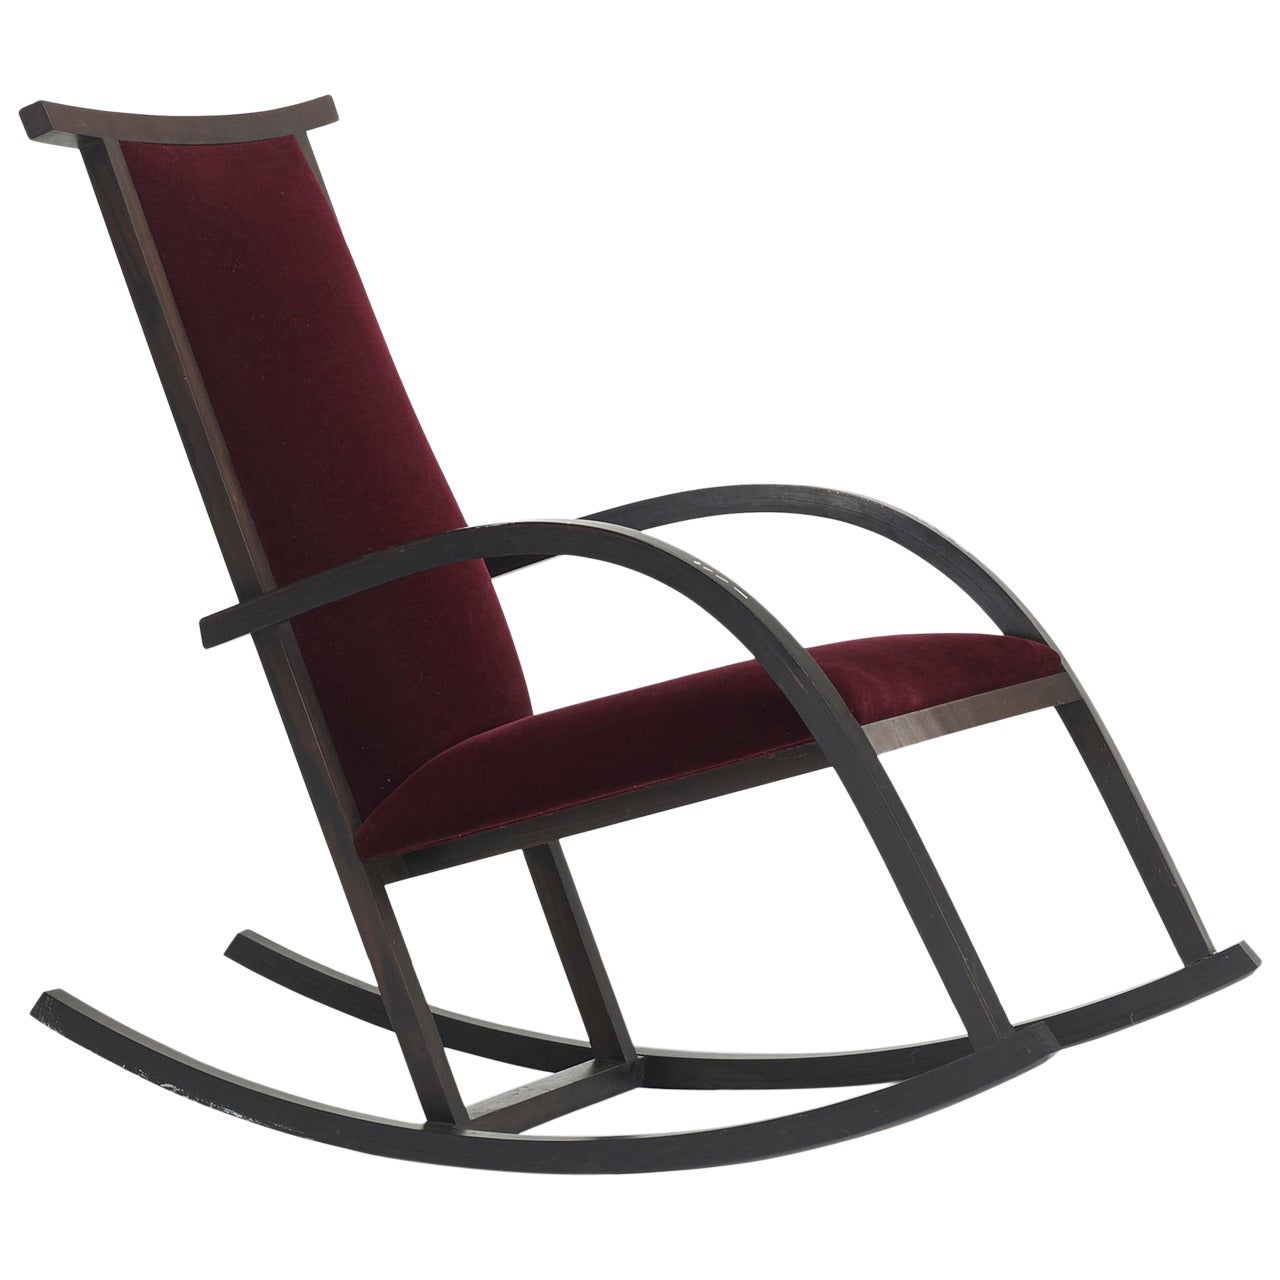 Riart Rocker by Carlos Riart for Knoll International For Sale